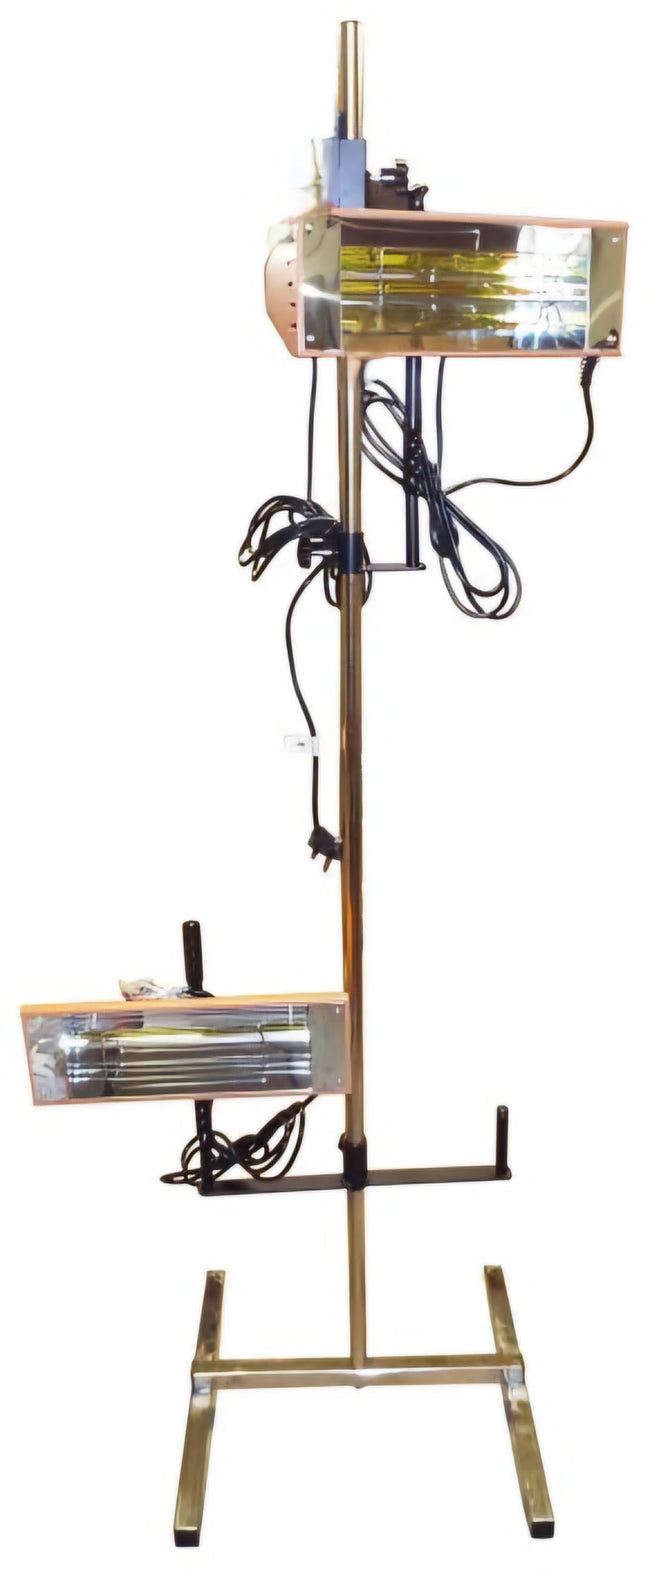 HEAD2 - TWIN HEAD 2KW INFRARED LAMP INC STAND